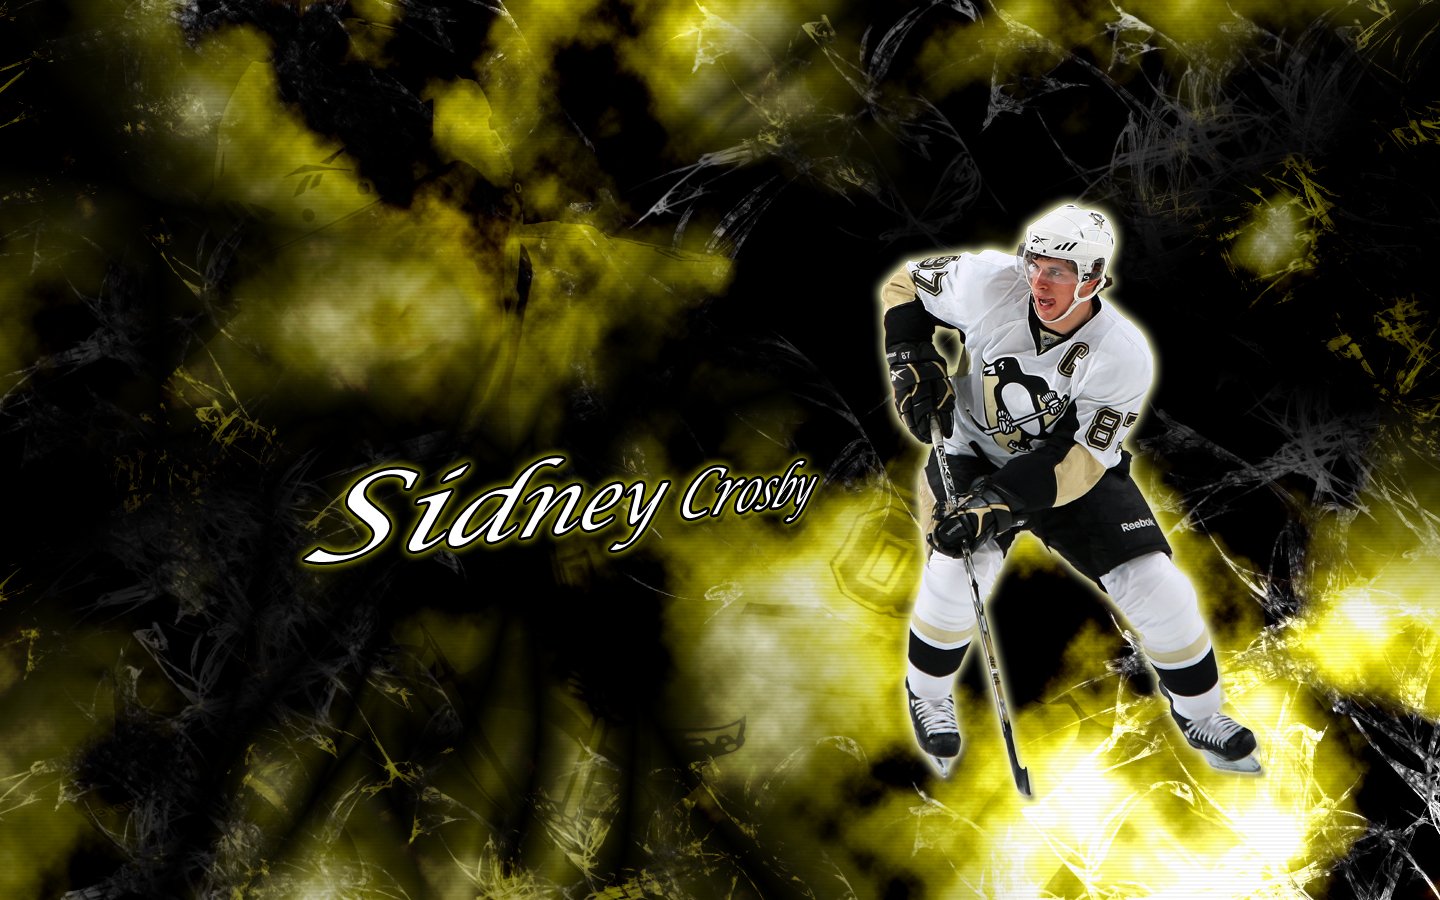 SIDNEY CROSBY Wallpaper   See best of PHOTOS of the Hockey Star